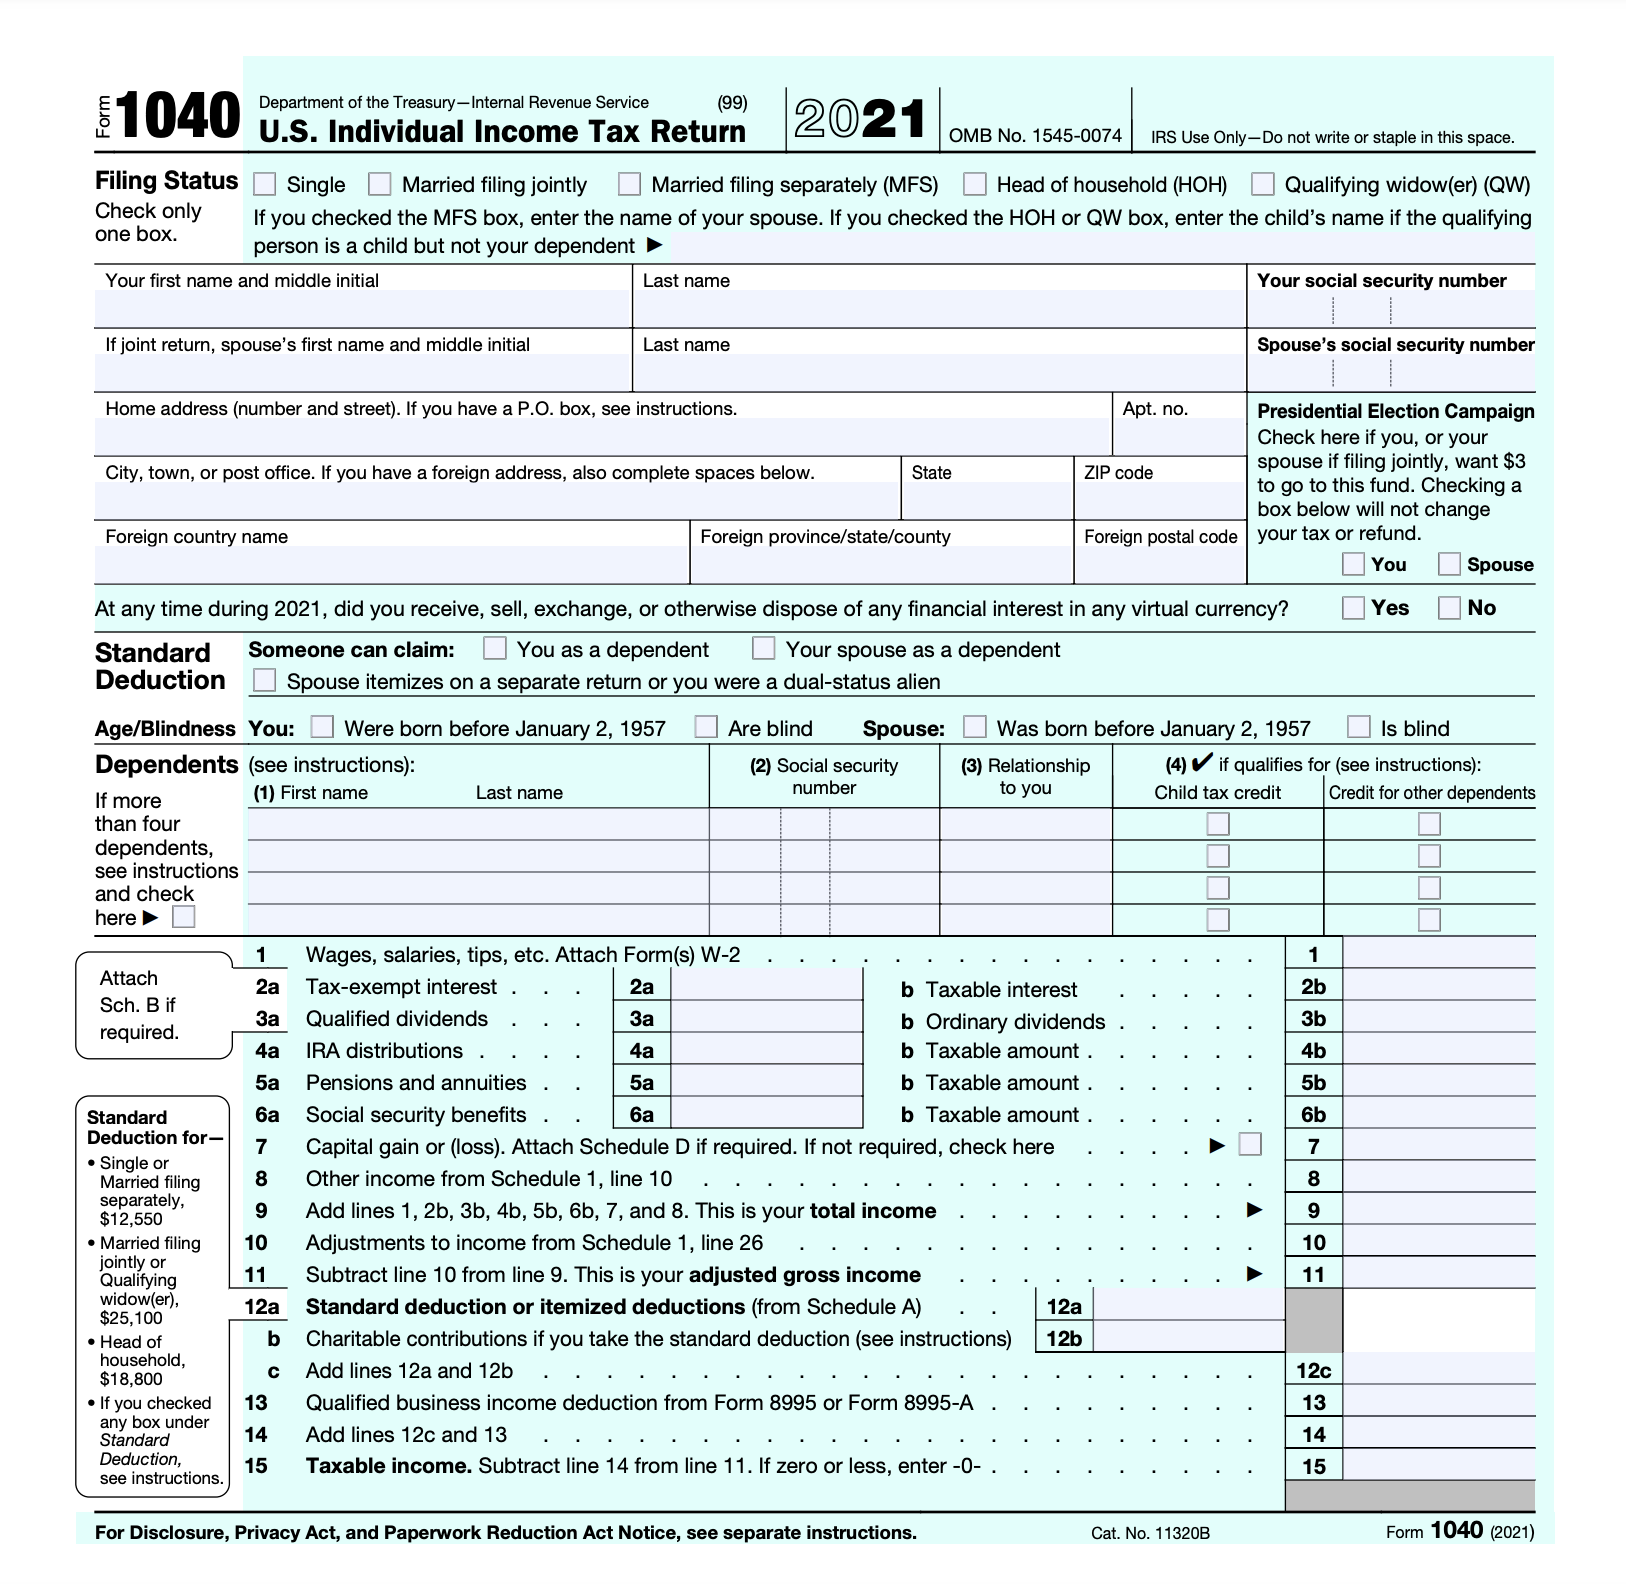 1040 tax form example